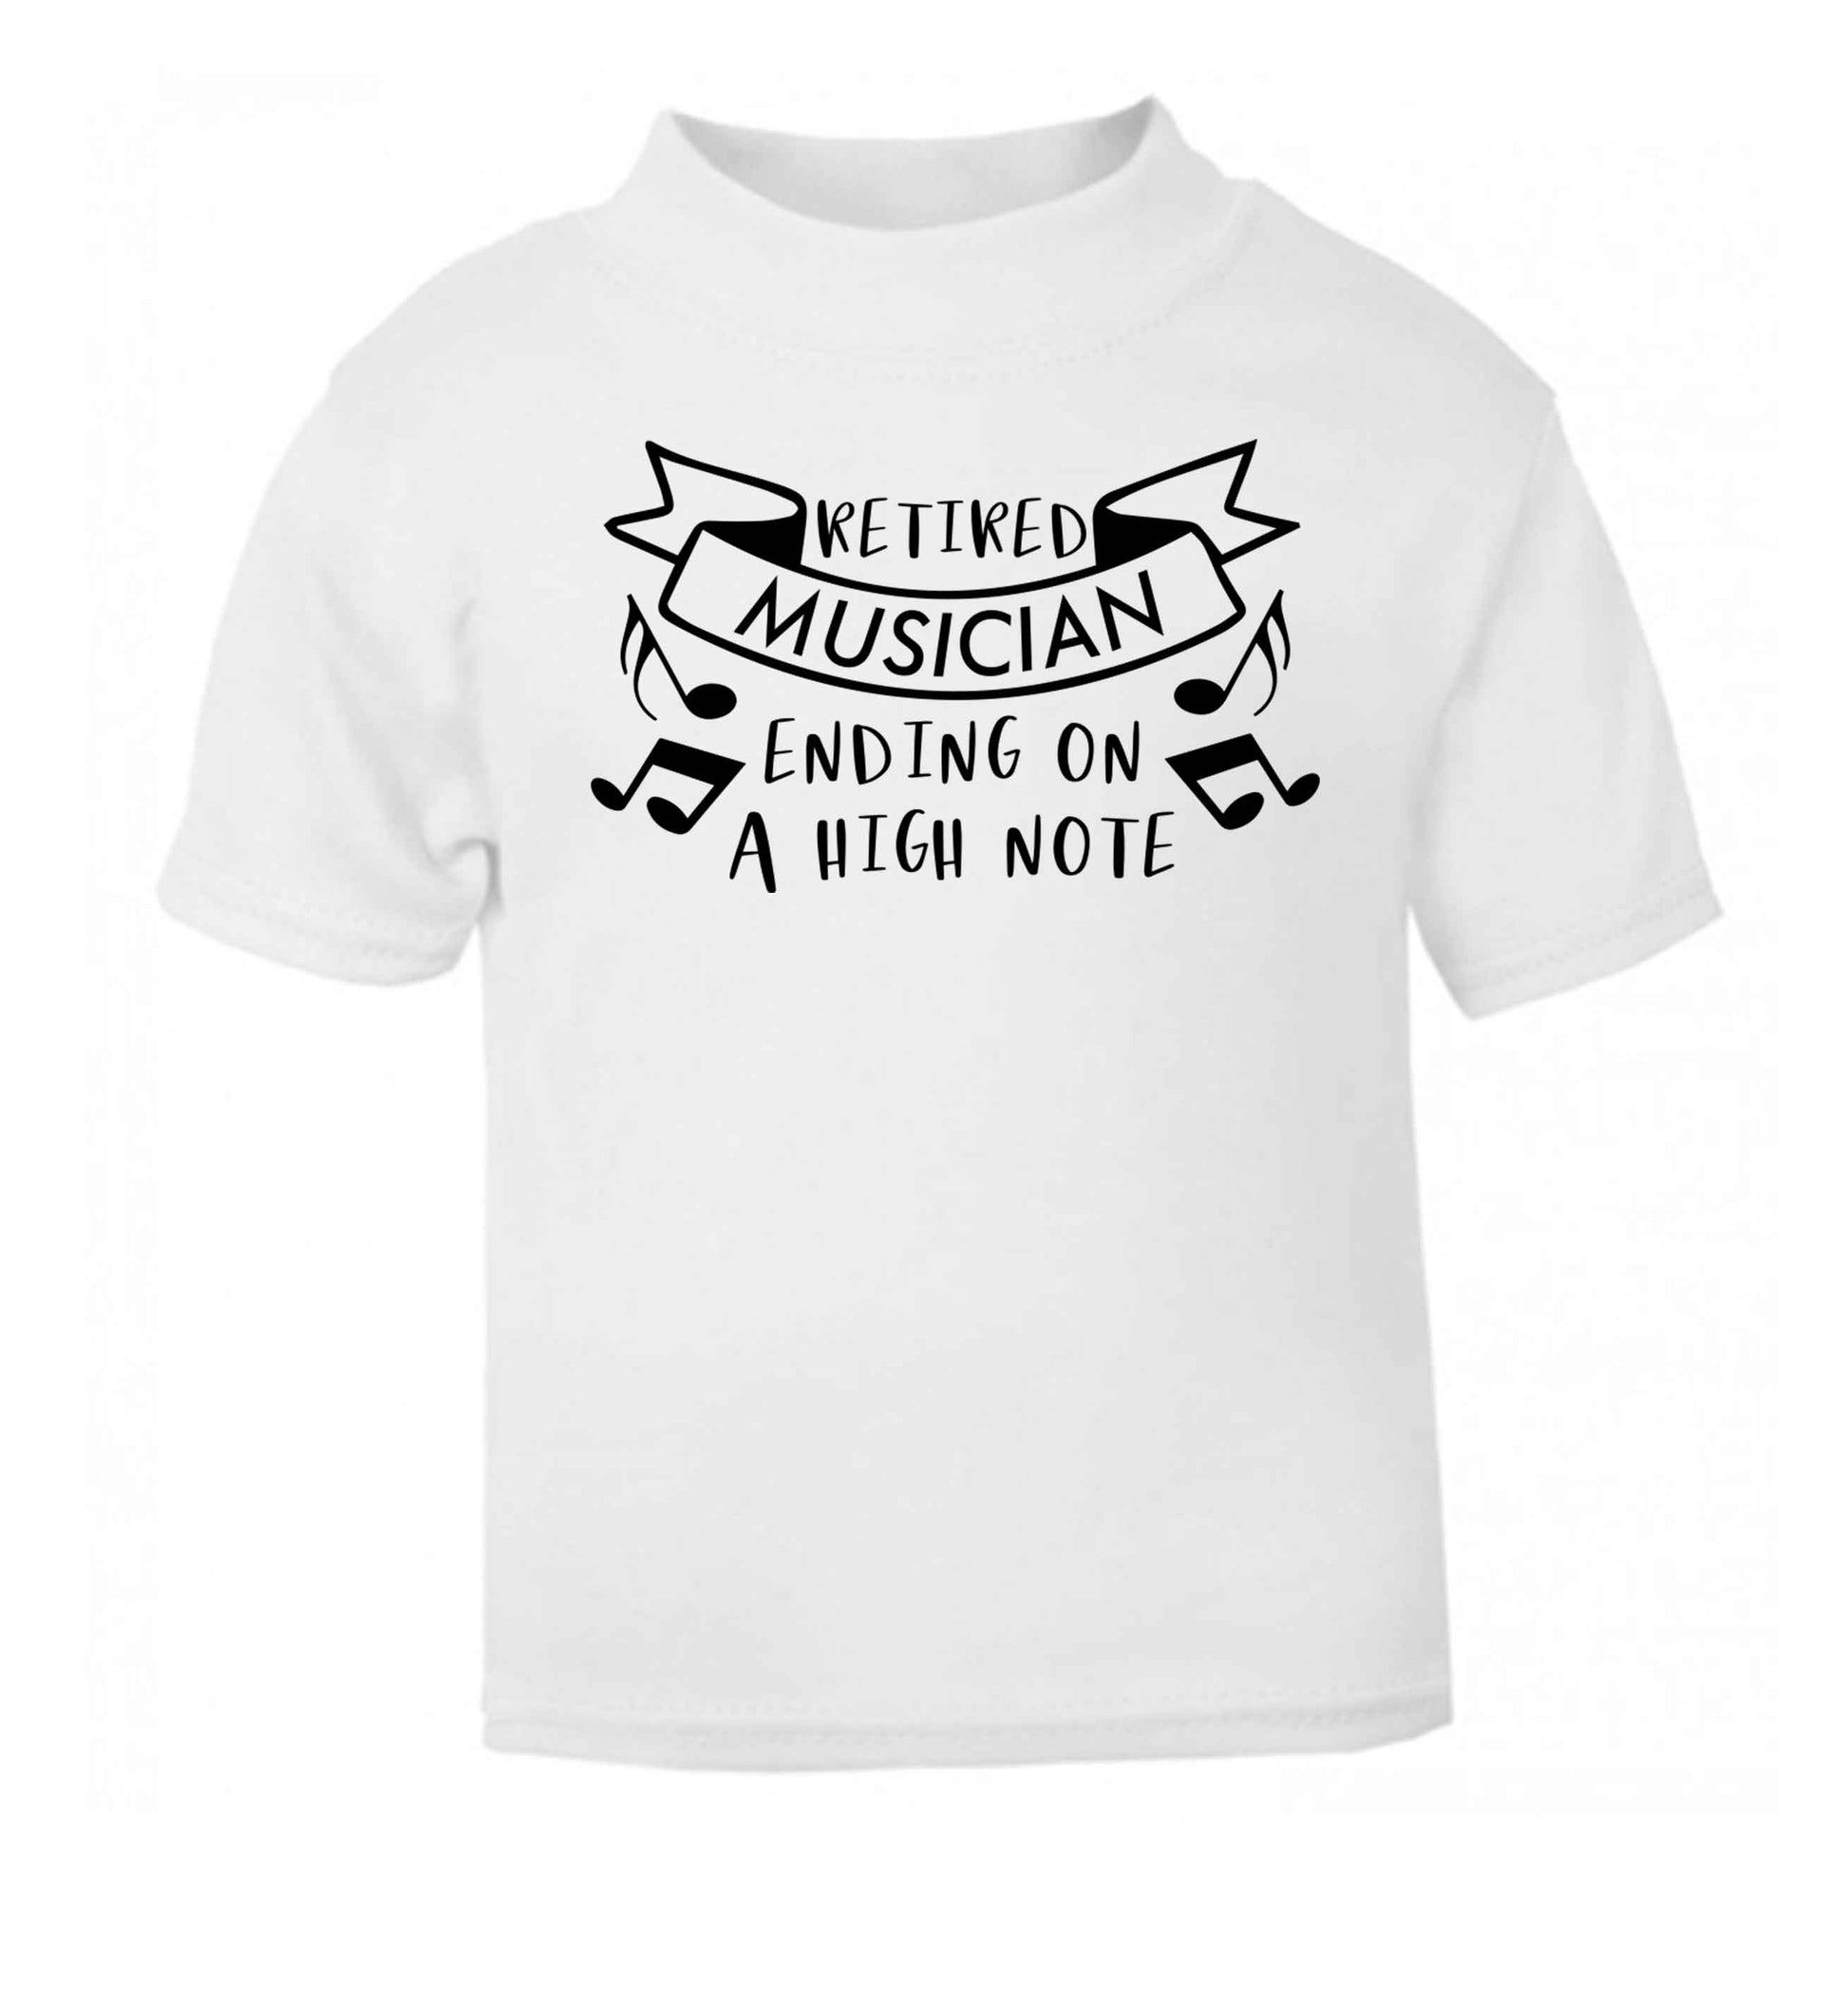 Retired musician ending on a high note white Baby Toddler Tshirt 2 Years